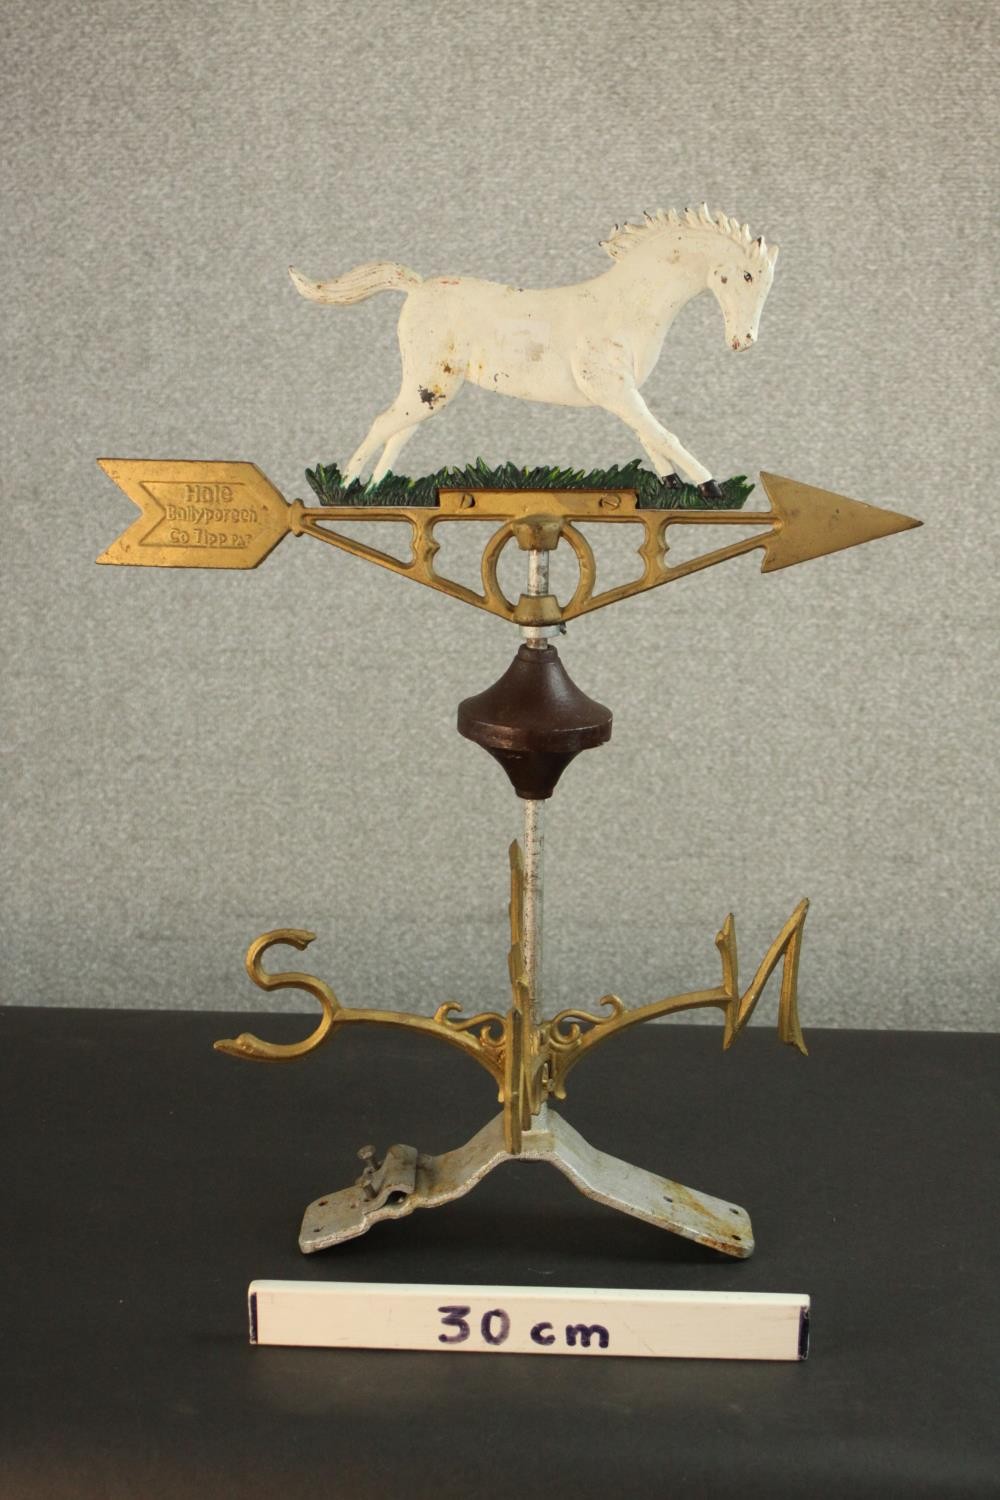 A hand painted white horse cast iron weather vane by Hale Ballyporeen Co Tipp Pat. H.59 W.47cm. - Image 2 of 7